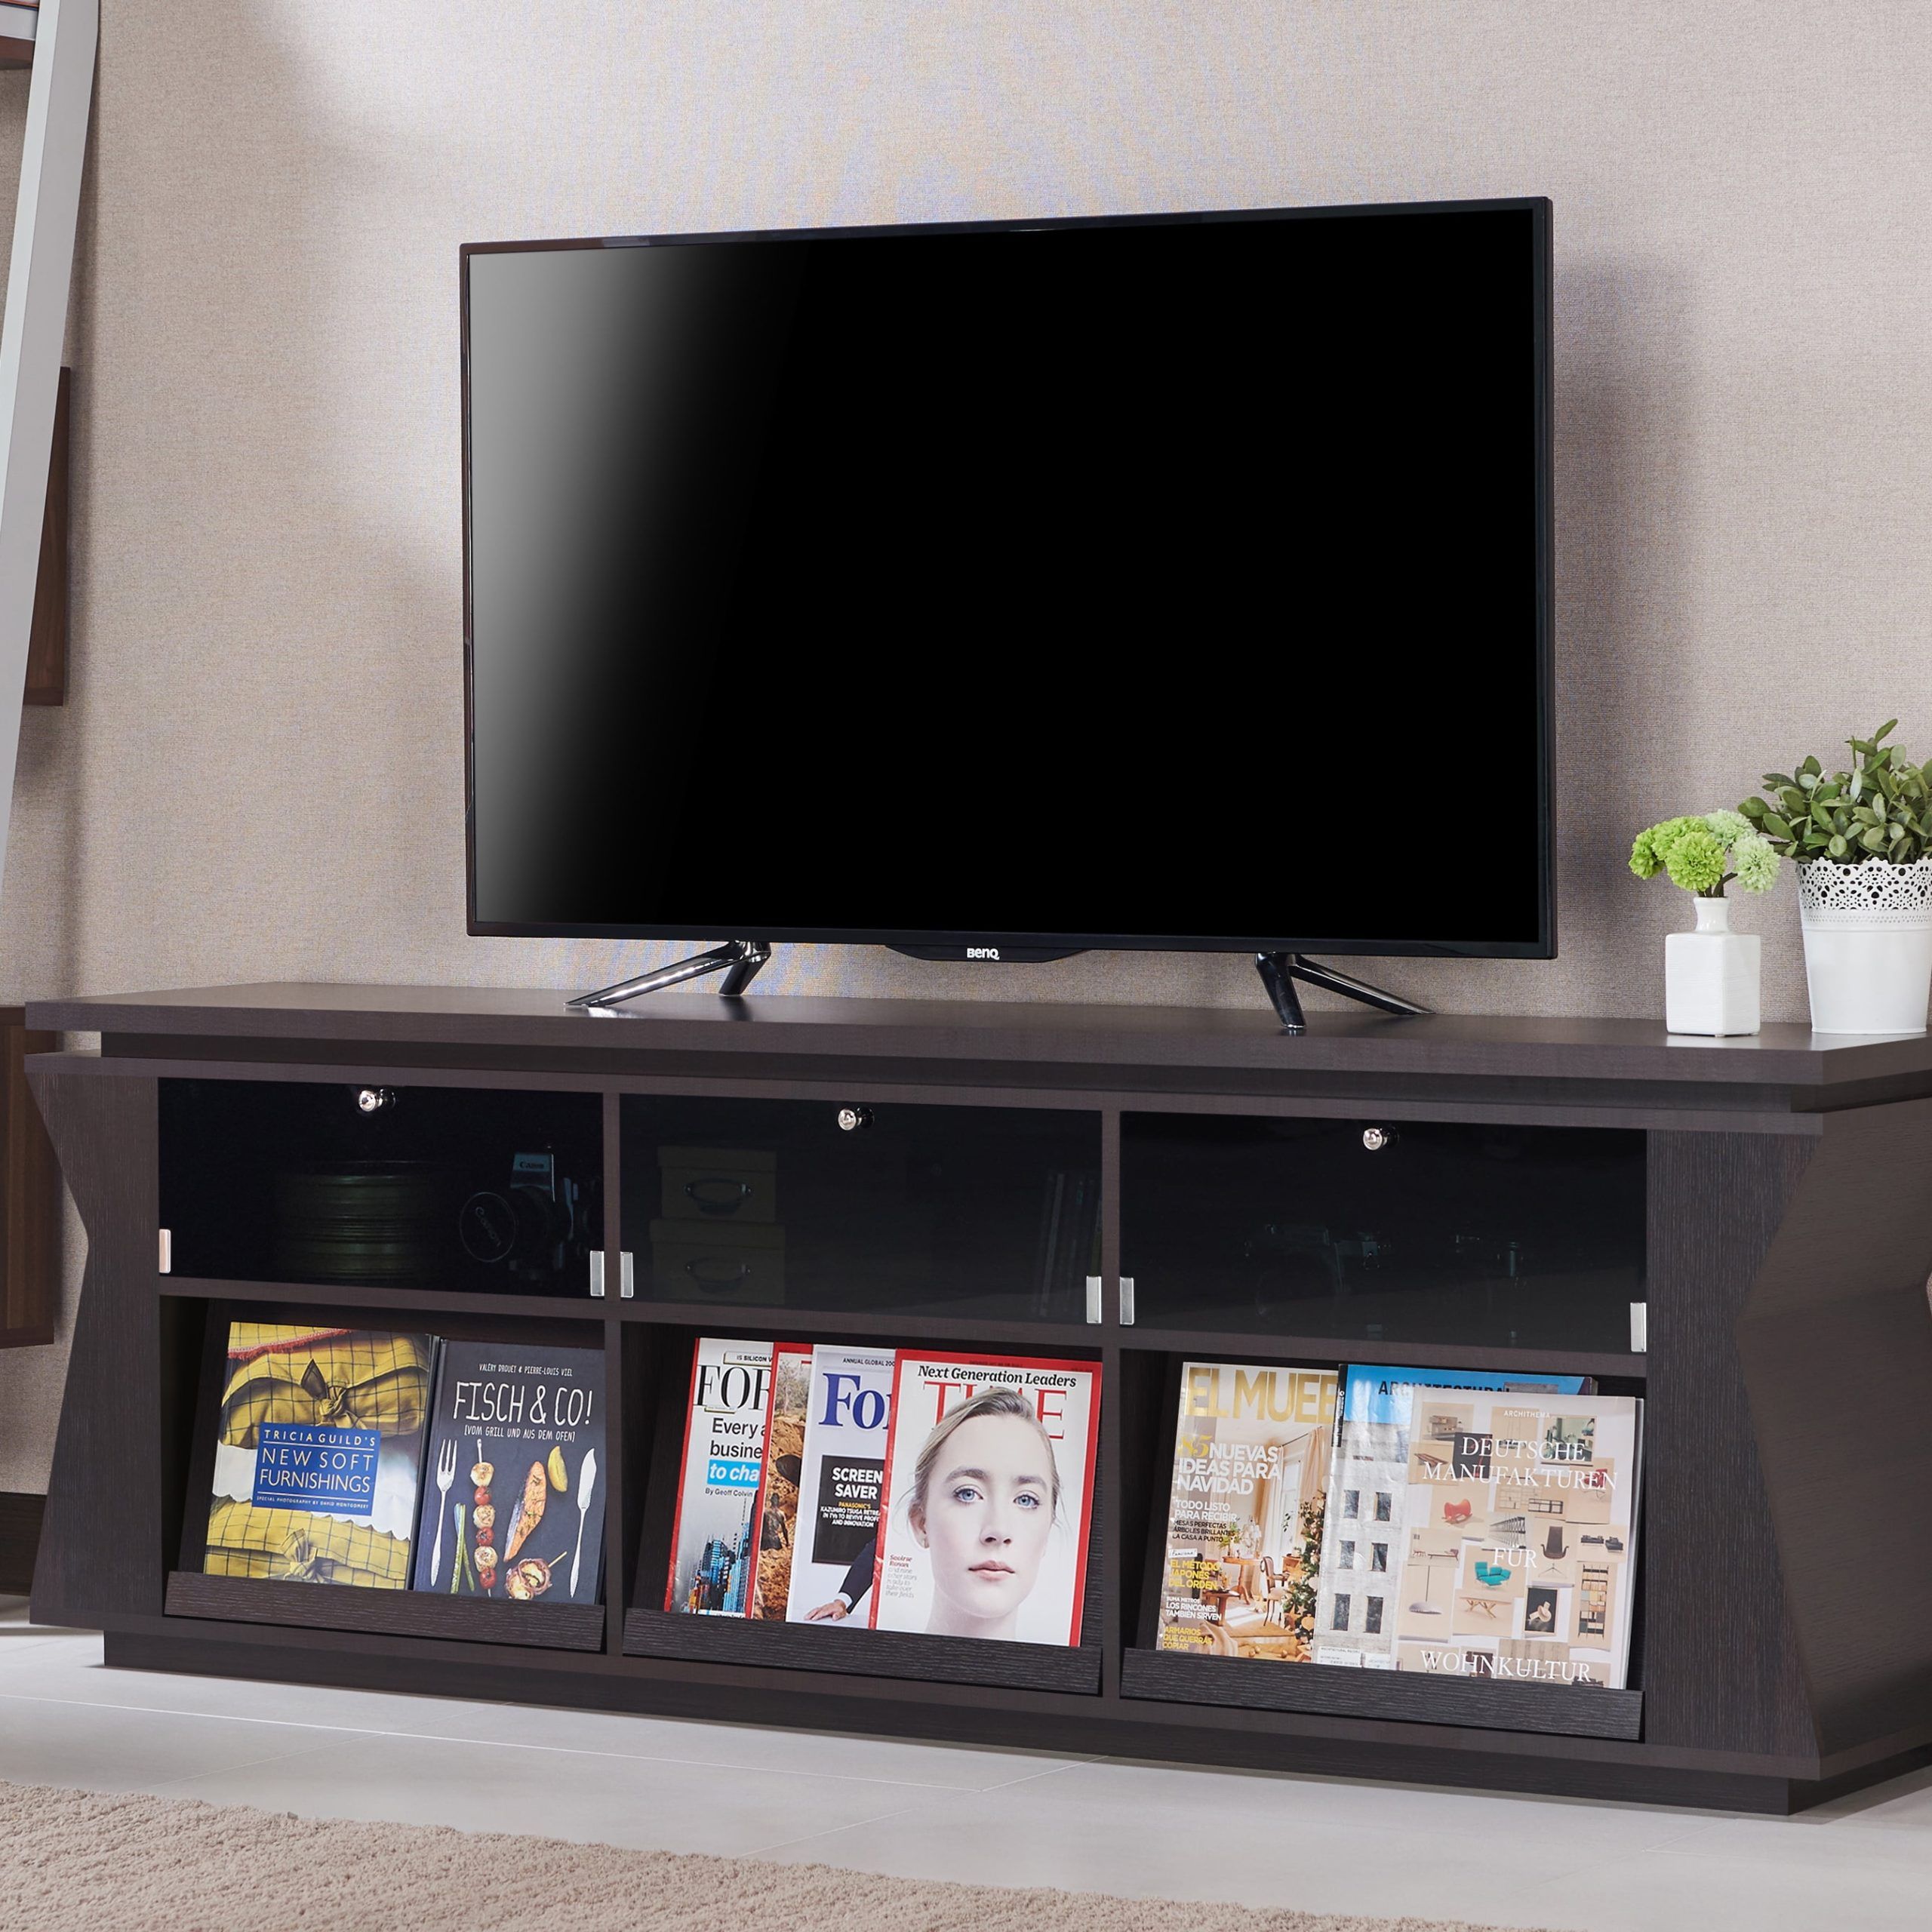 Furniture Of America Forman Multi Storage Tv Stand, 70", Espresso With Regard To Cafe Tv Stands With Storage (Gallery 2 of 20)